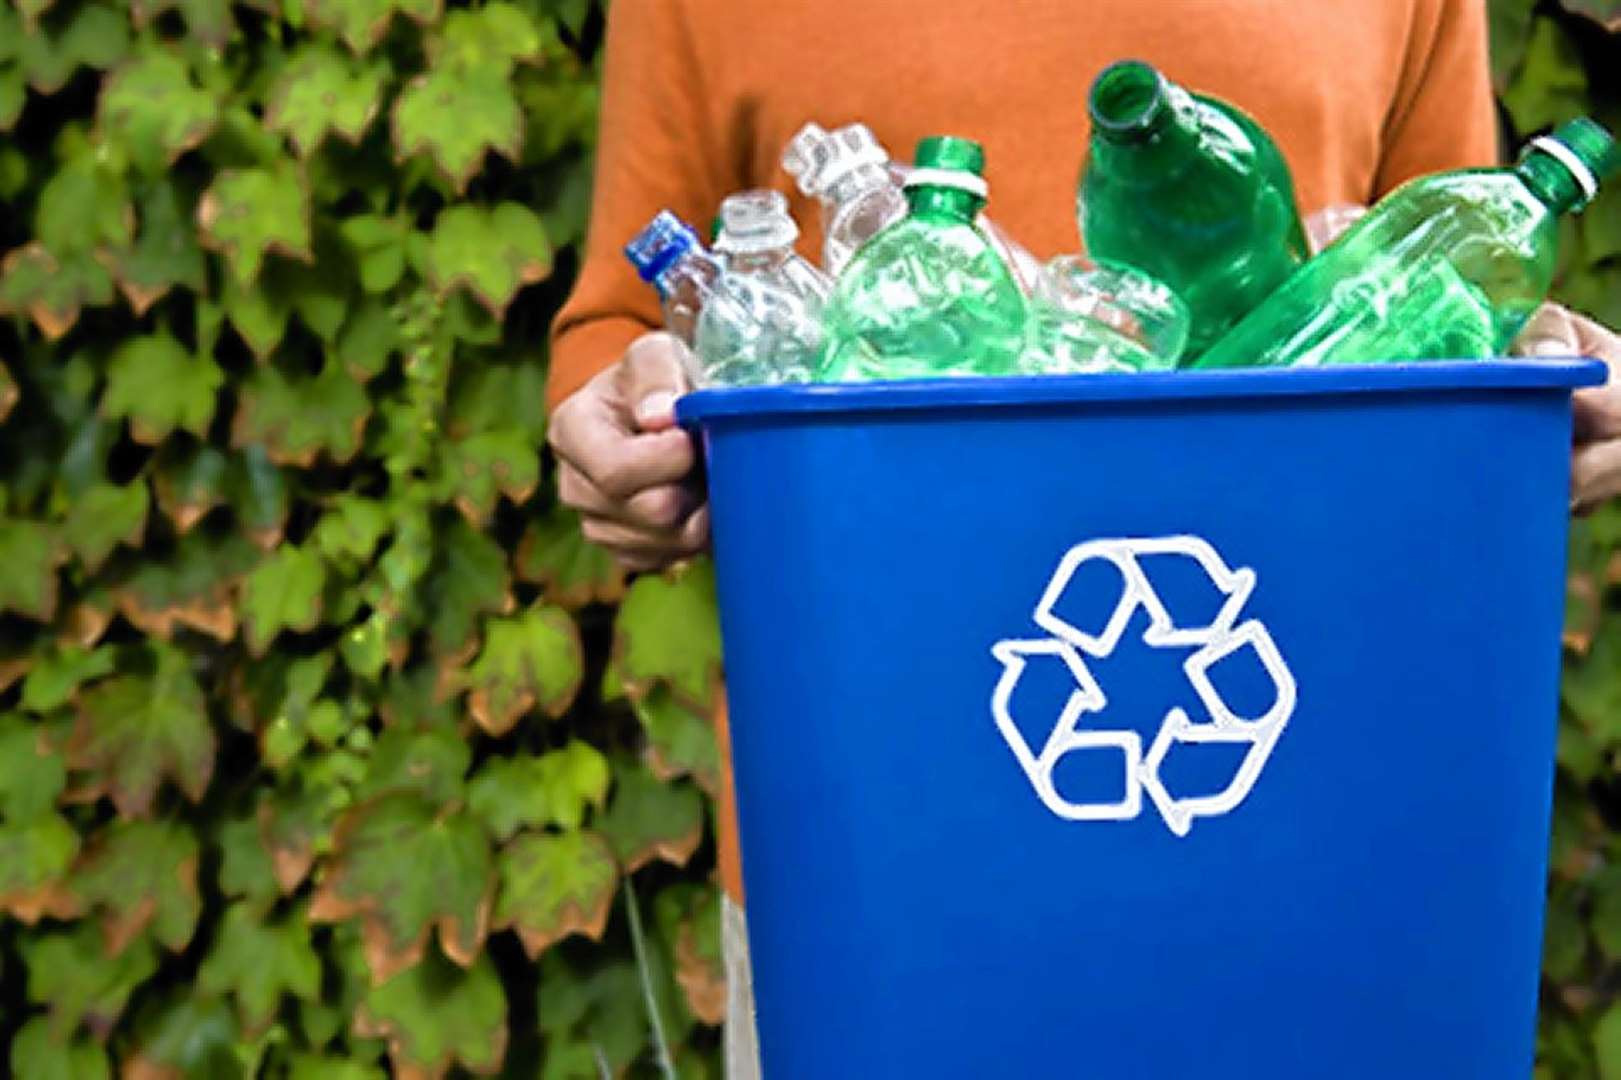 The local authority is looking to increase recycling at its waste centres.